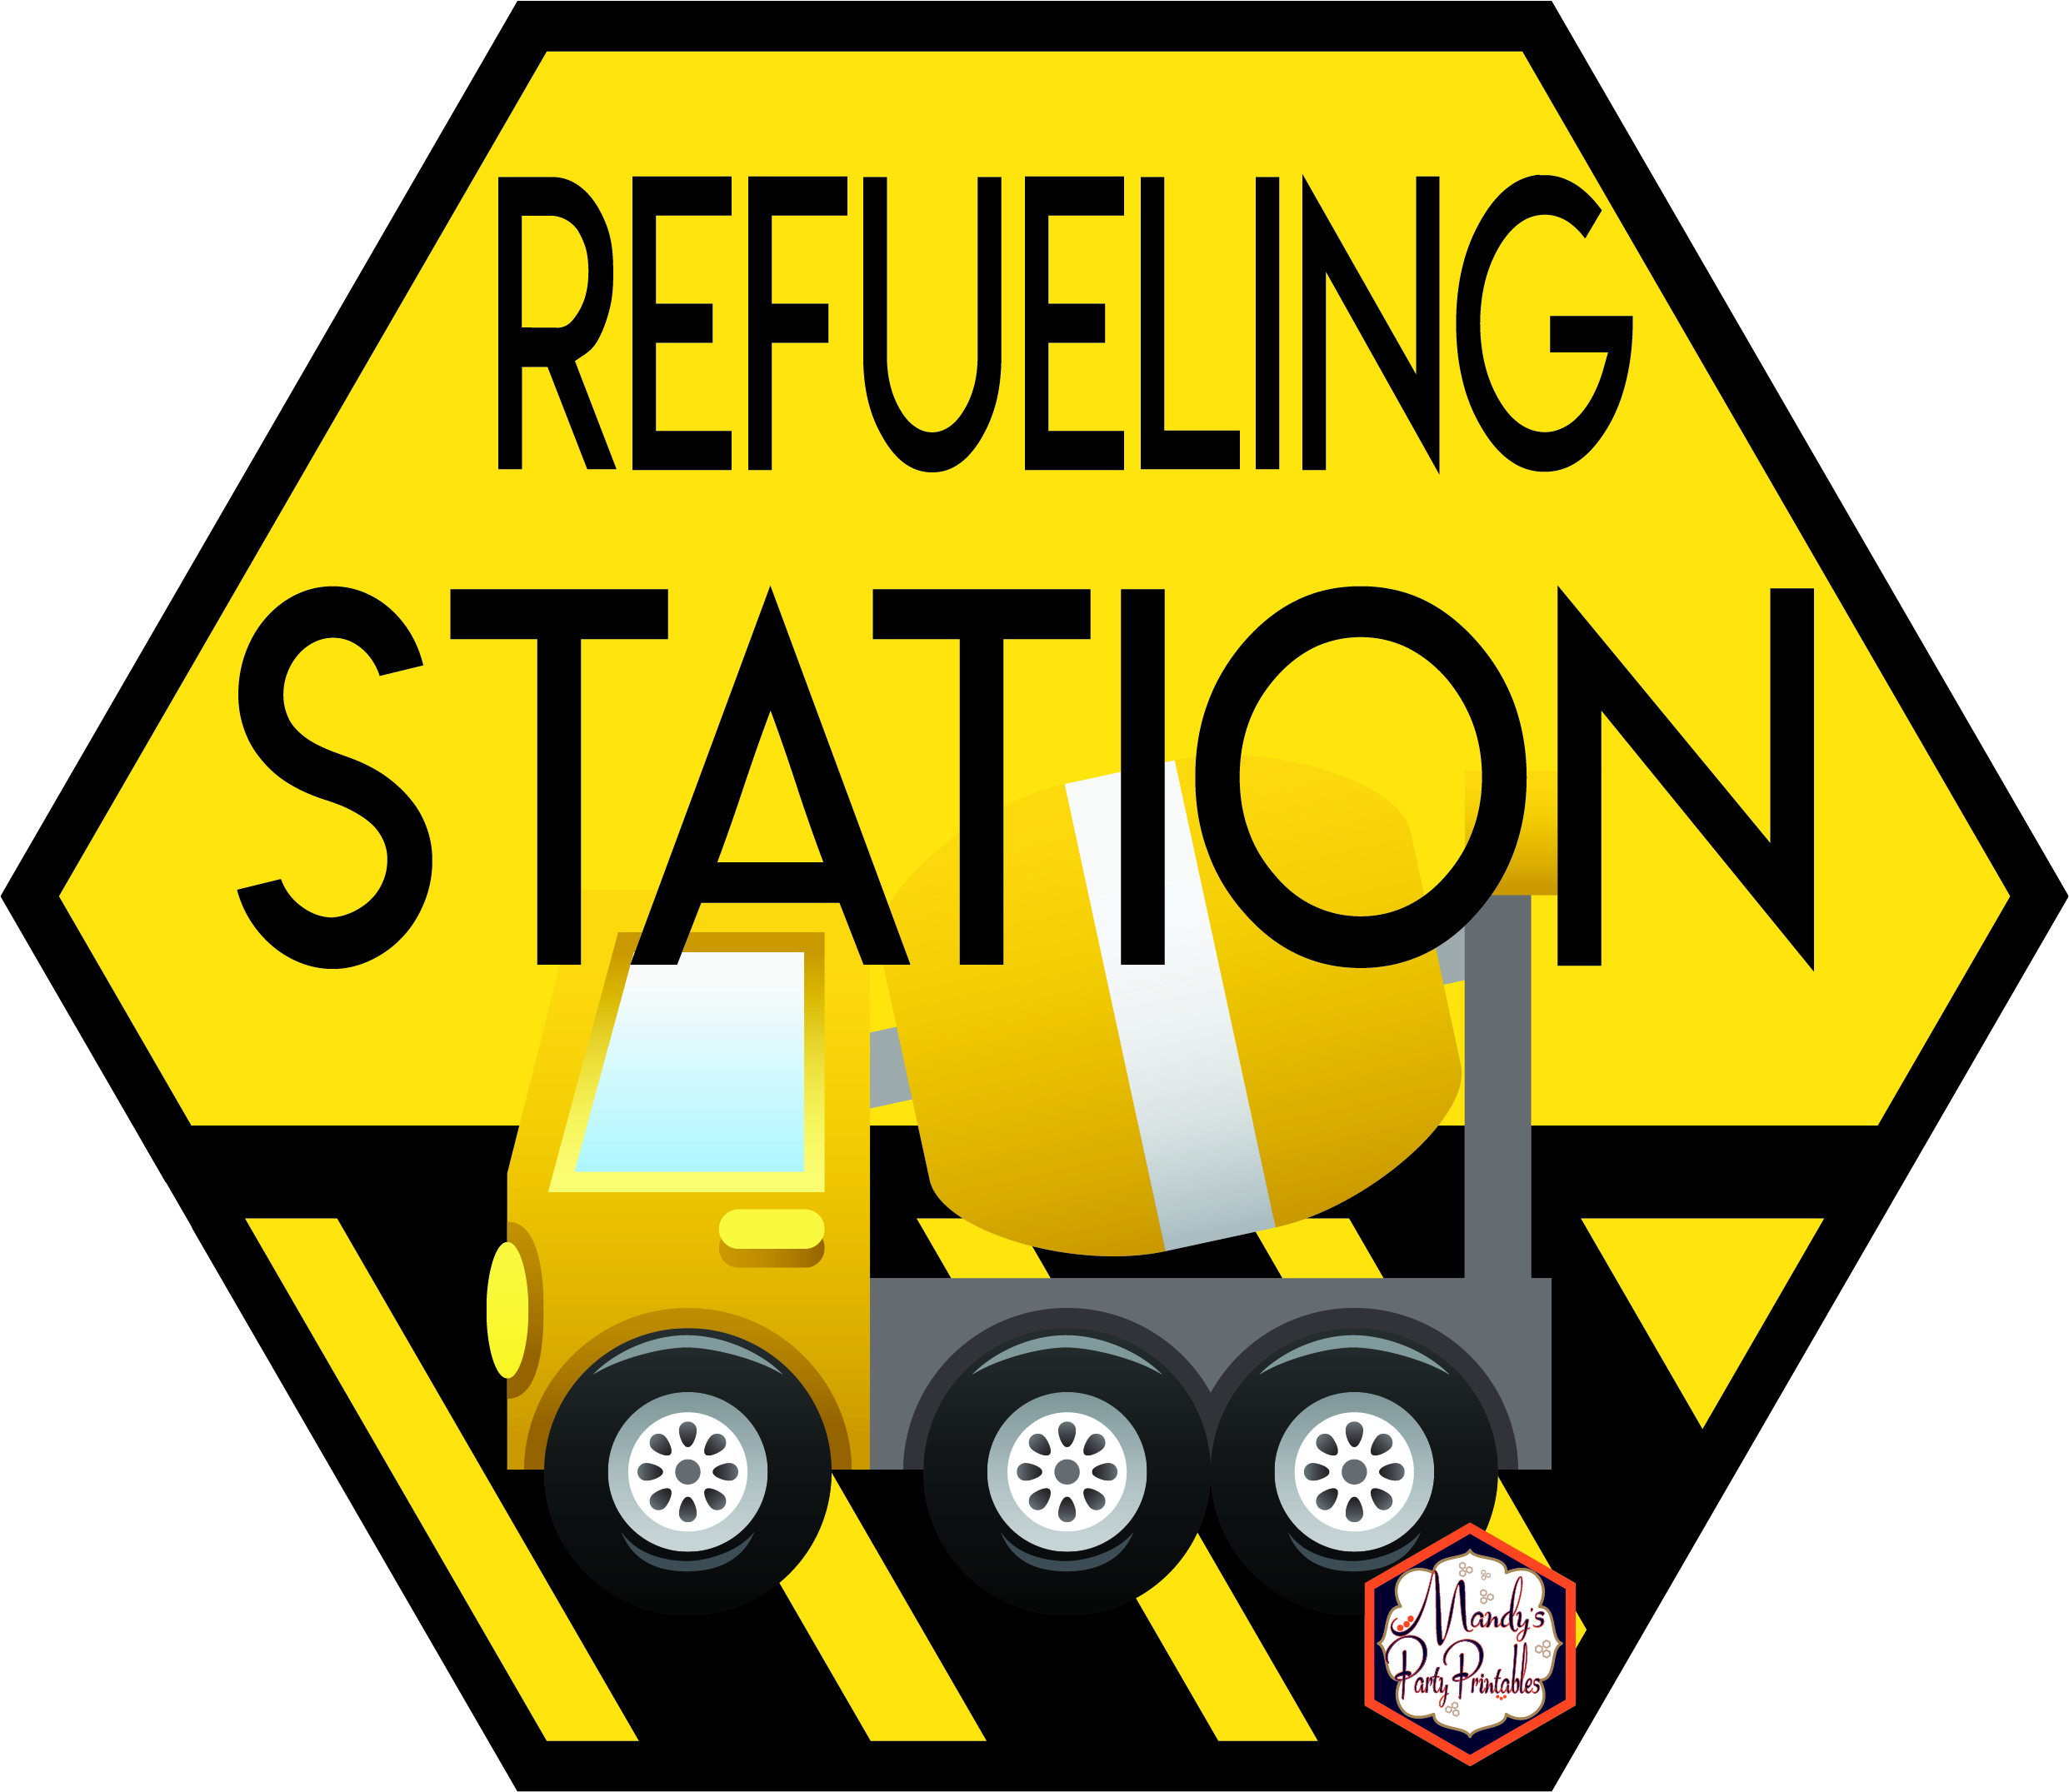 Refueling Station Sign from Construction Birthday Party Printables via Mandy's Party Printables